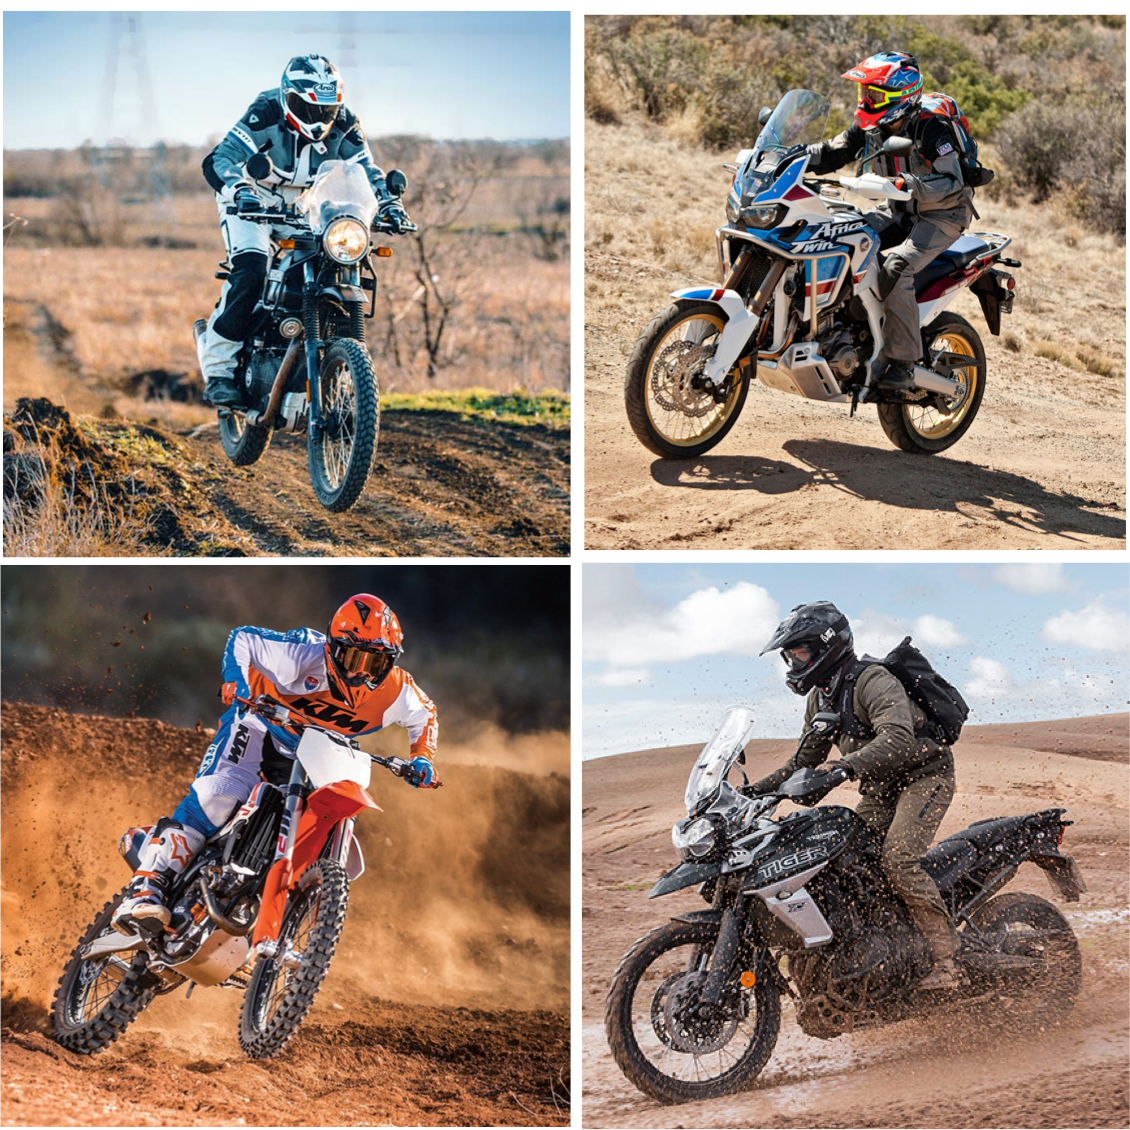 Top 5 Off-Road Motorcycles in India - By Sarah Kashyap, Cross Country Rallyist.